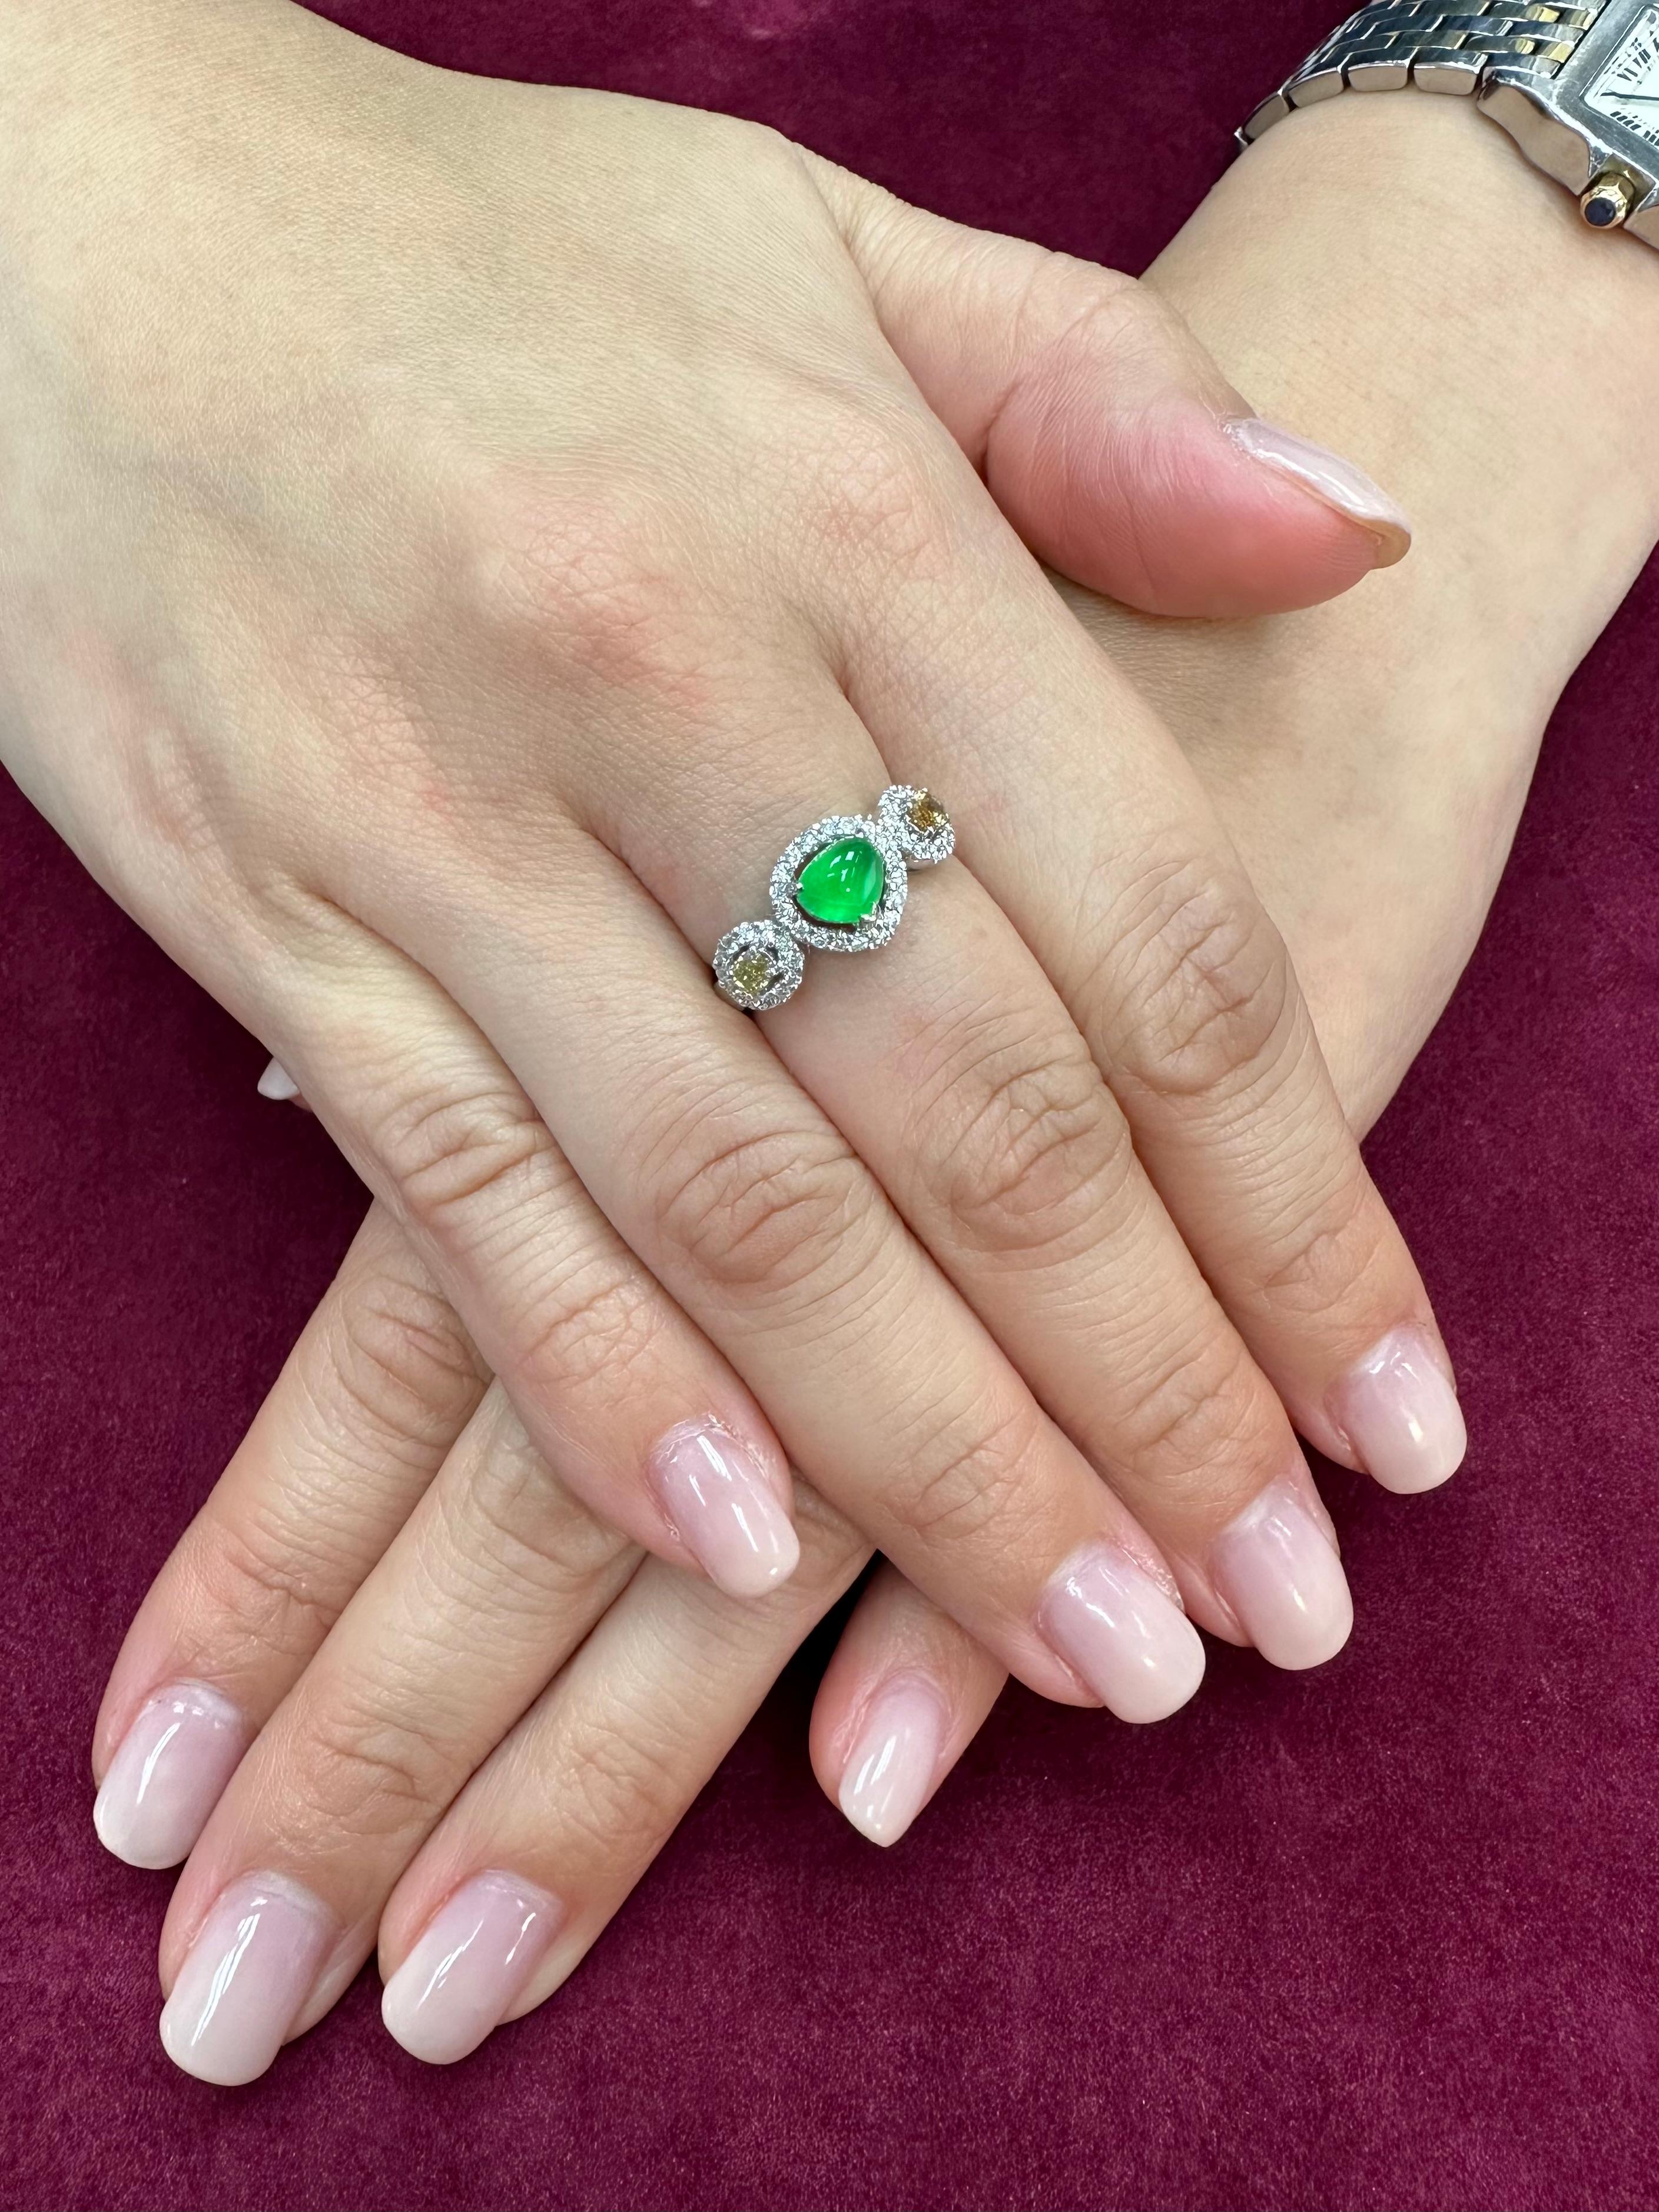 Please check out the HD video. The GLOW (under normal light) on this jade is off the charts! It is even nicer in person than any videos or photos. Here is a bright apple green Jade and fancy yellow diamond ring. It is certified. The ring is set in